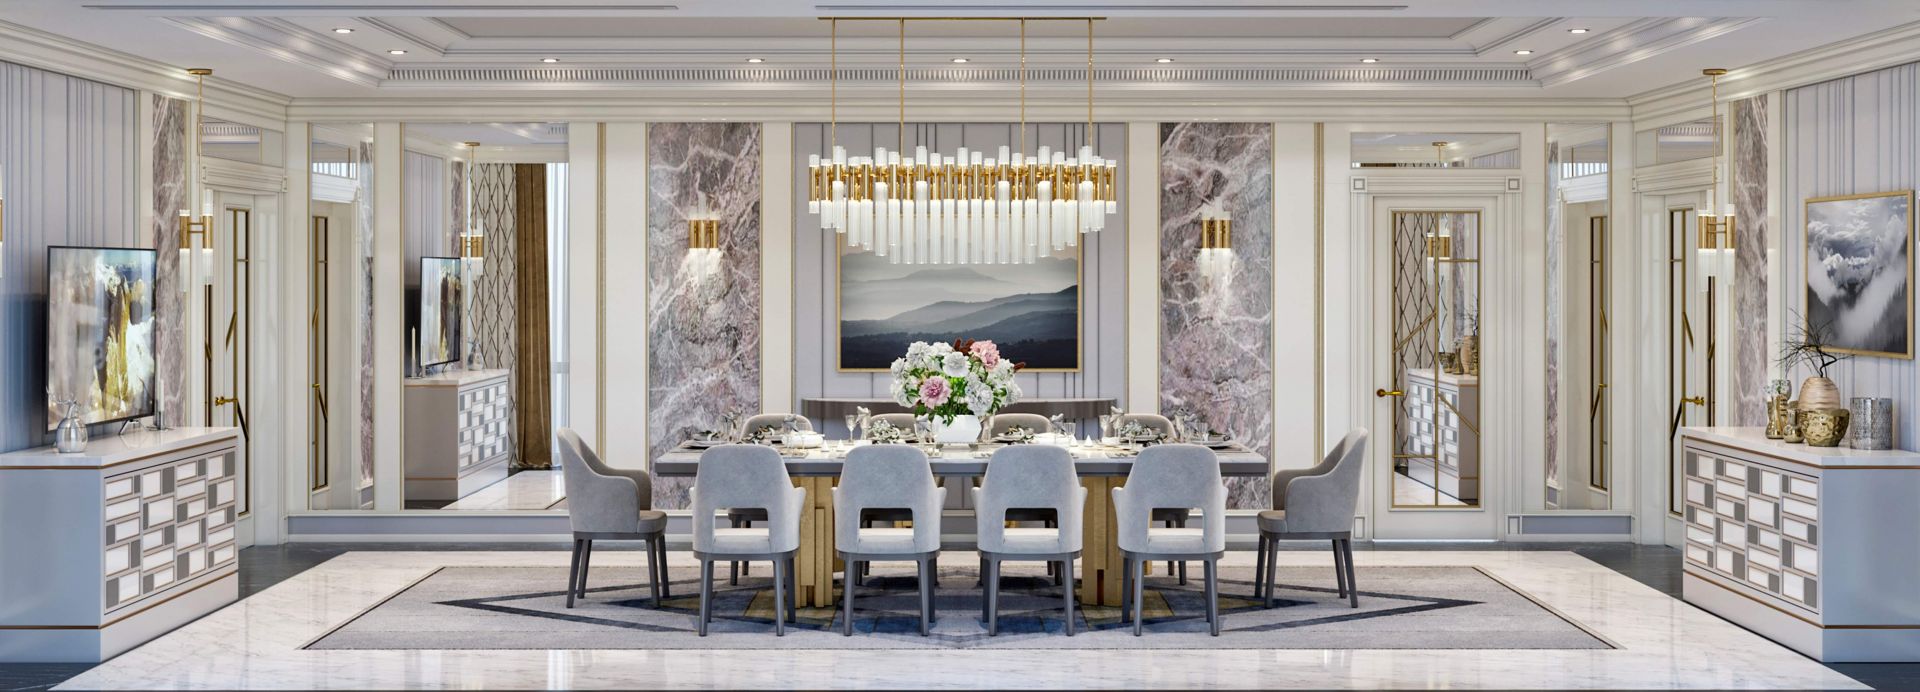 Design project of the living-dining room in the Hilton Hotel